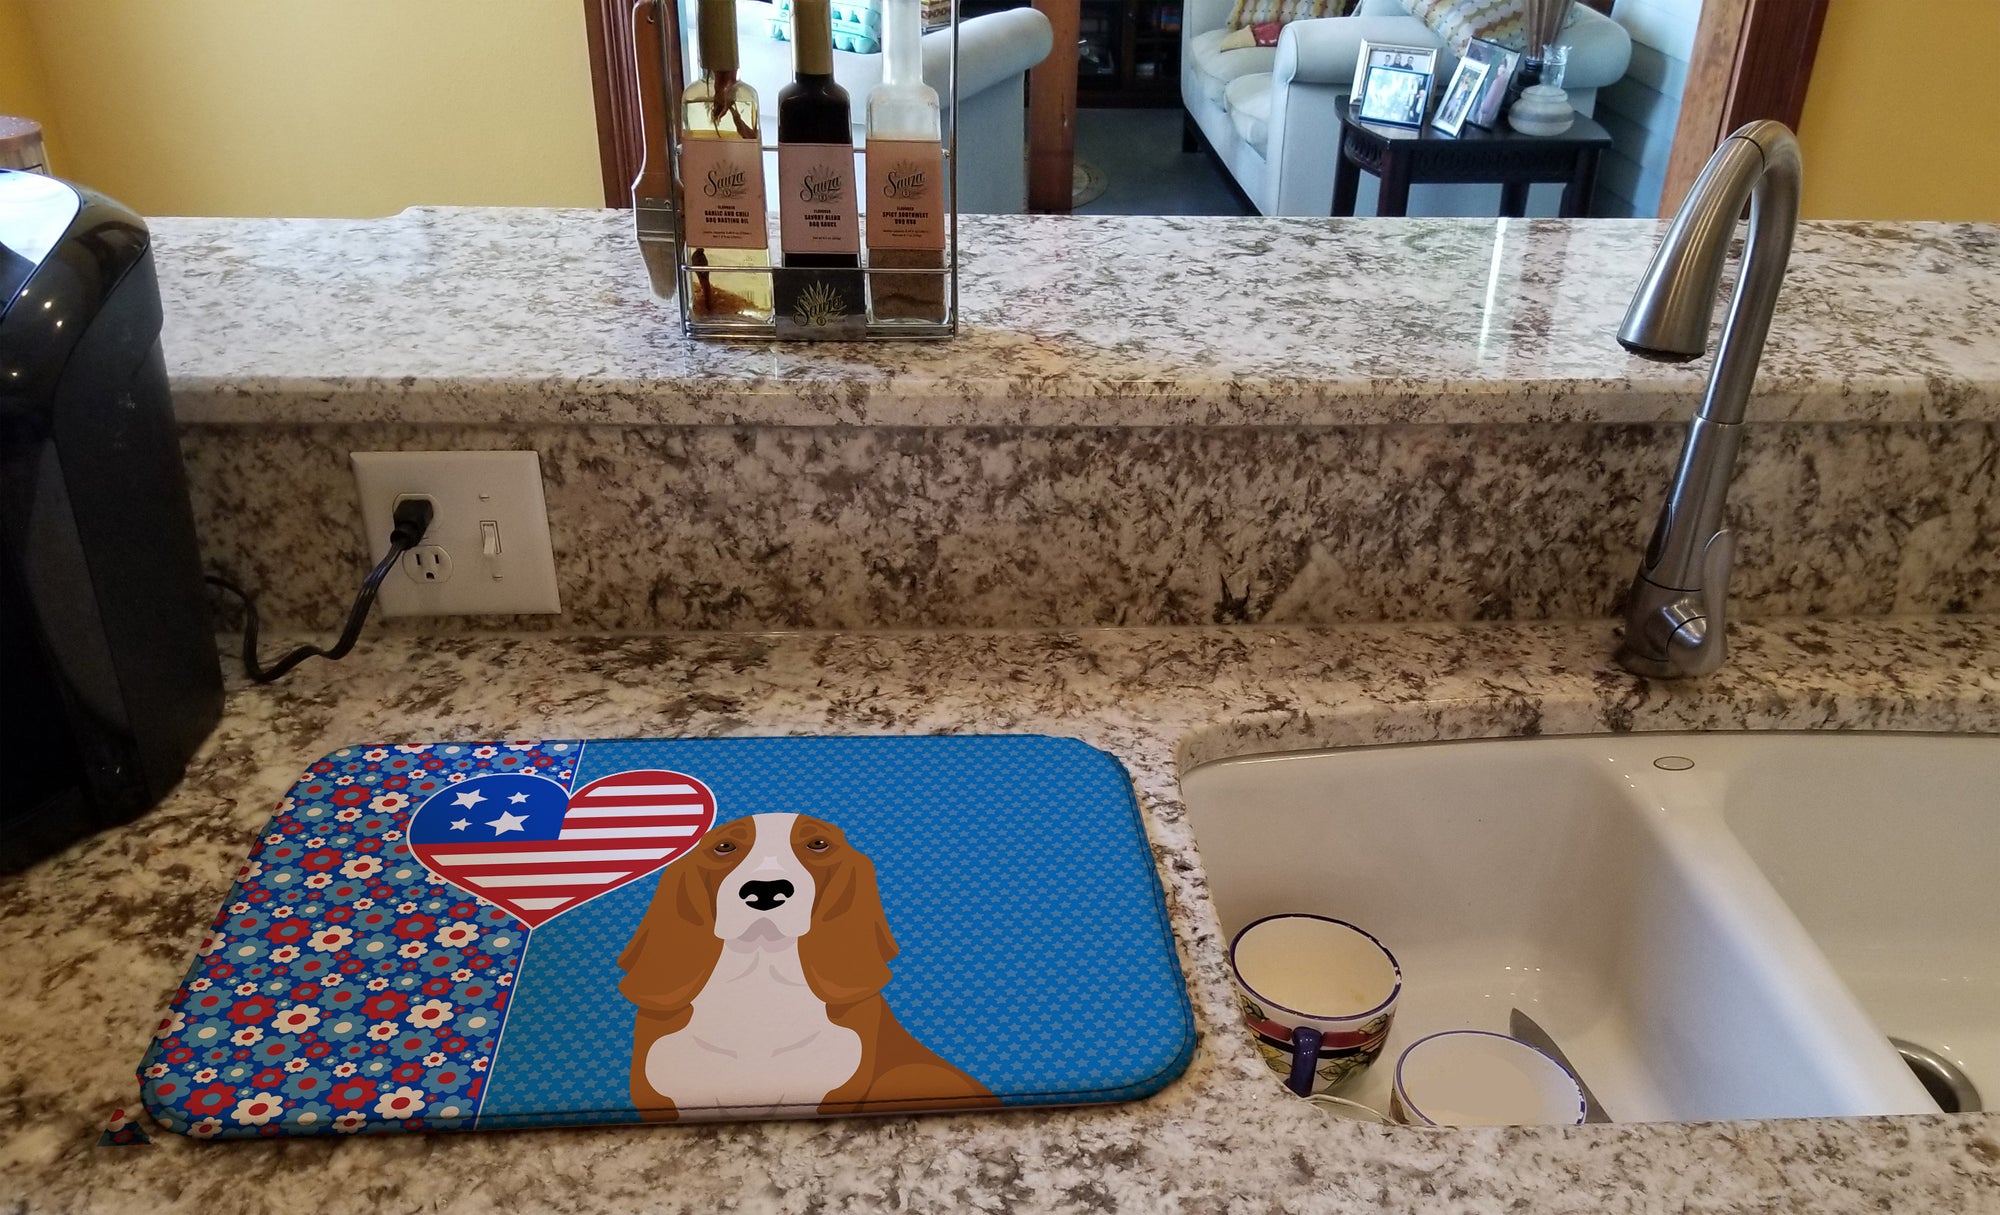 Red and White Tricolor Basset Hound USA American Dish Drying Mat